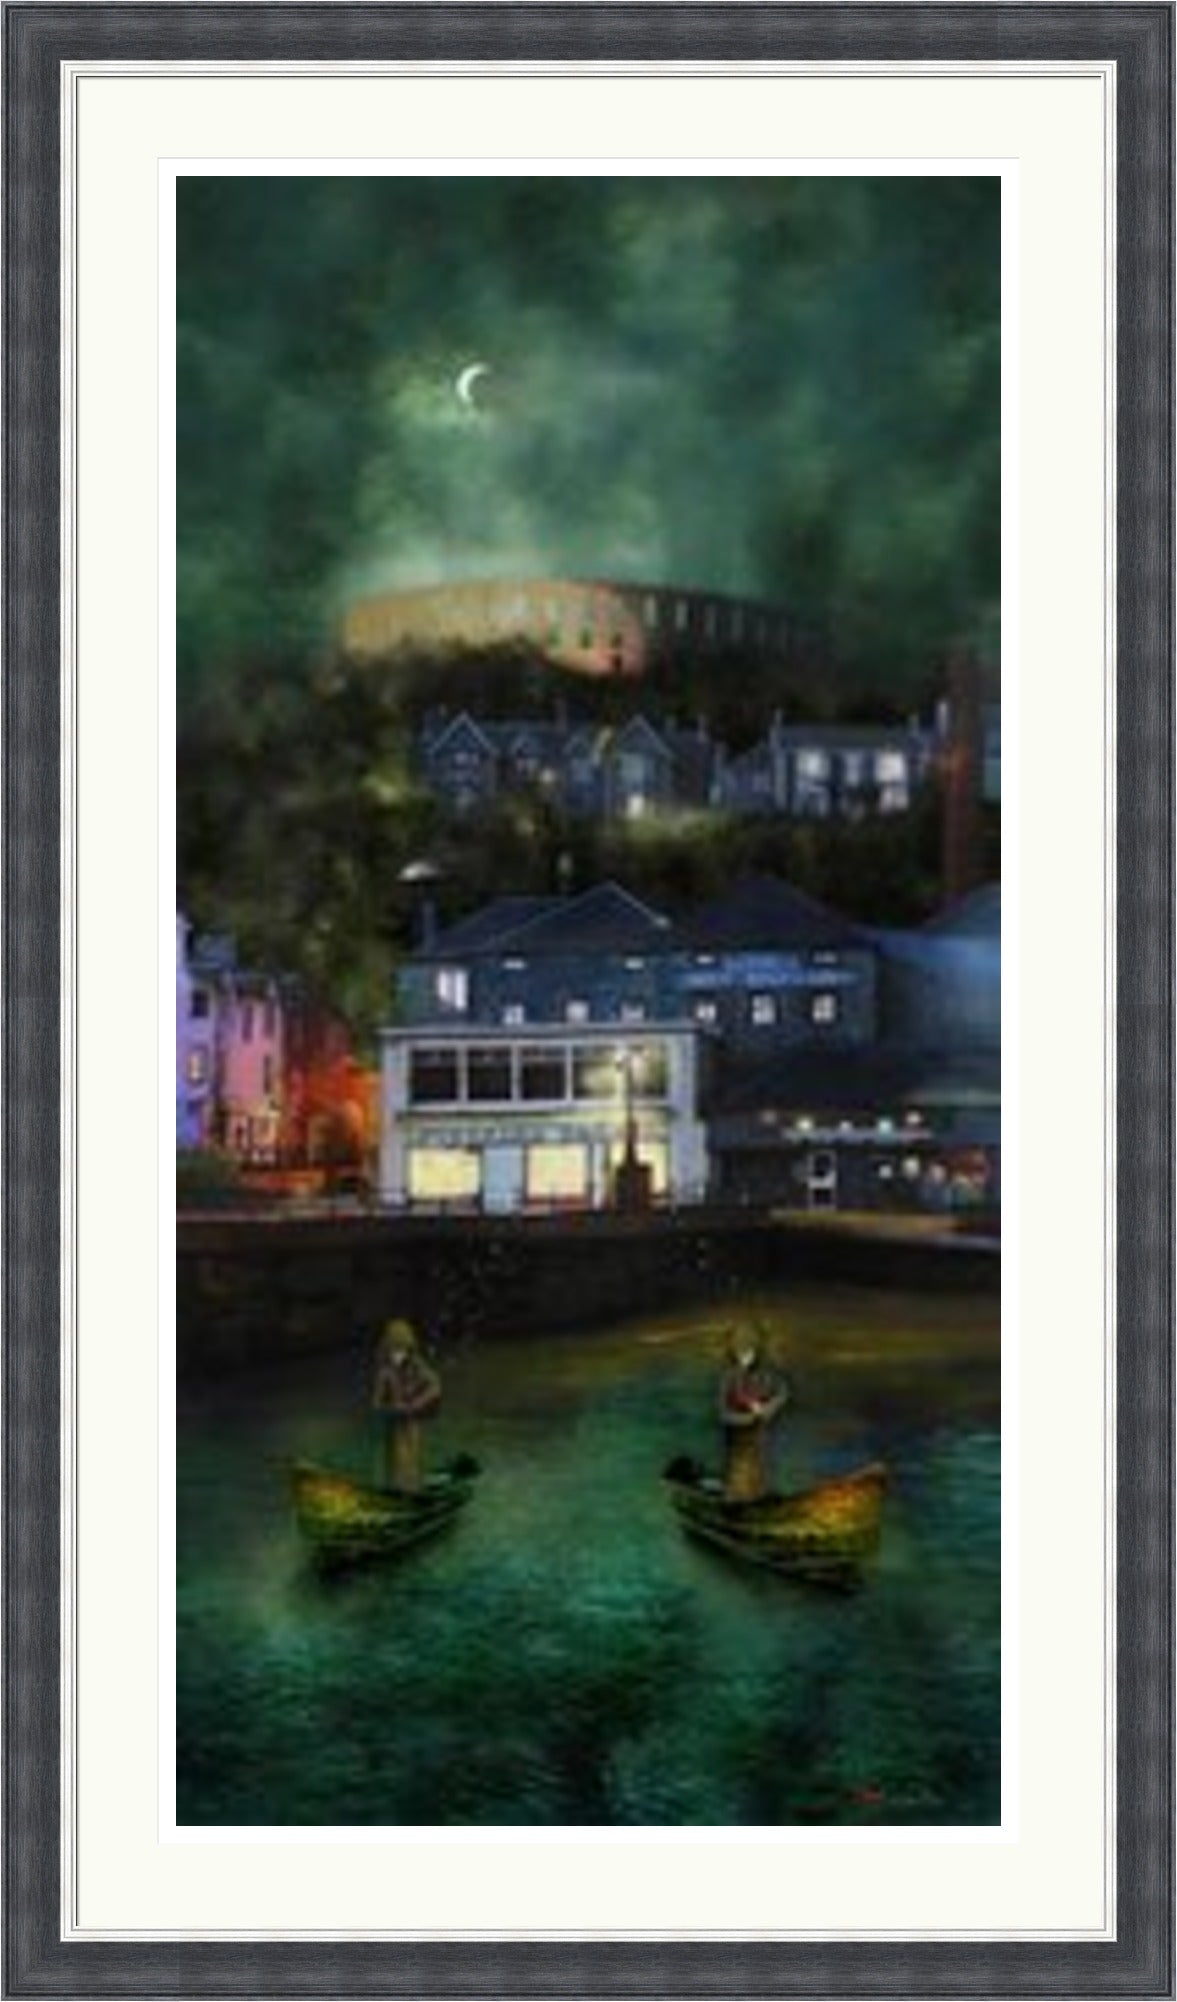 The Pipers, Oban by Matylda Konecka